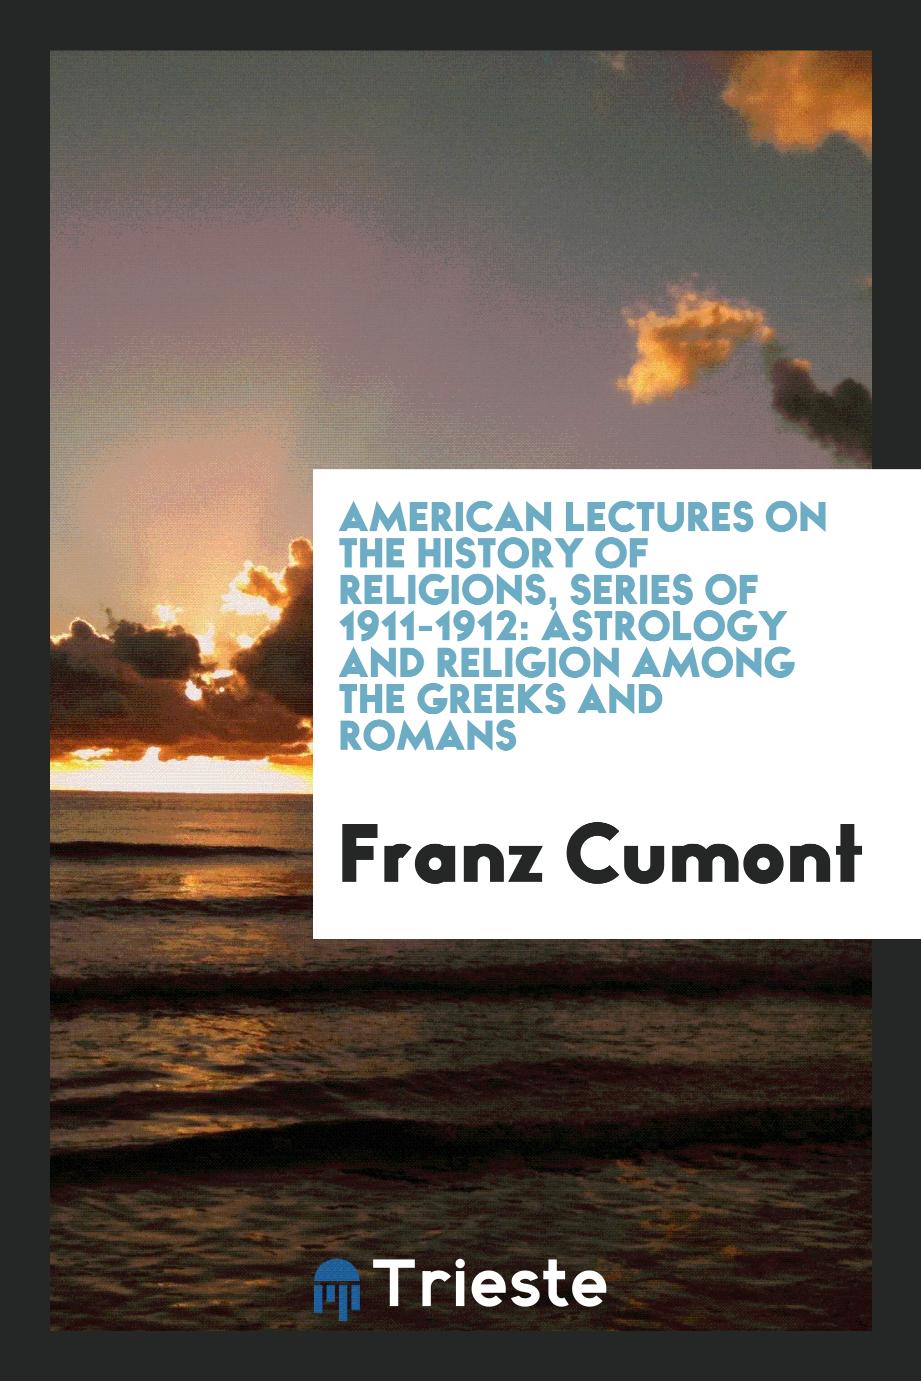 American lectures on the history of religions, series of 1911-1912: Astrology and religion among the Greeks and Romans